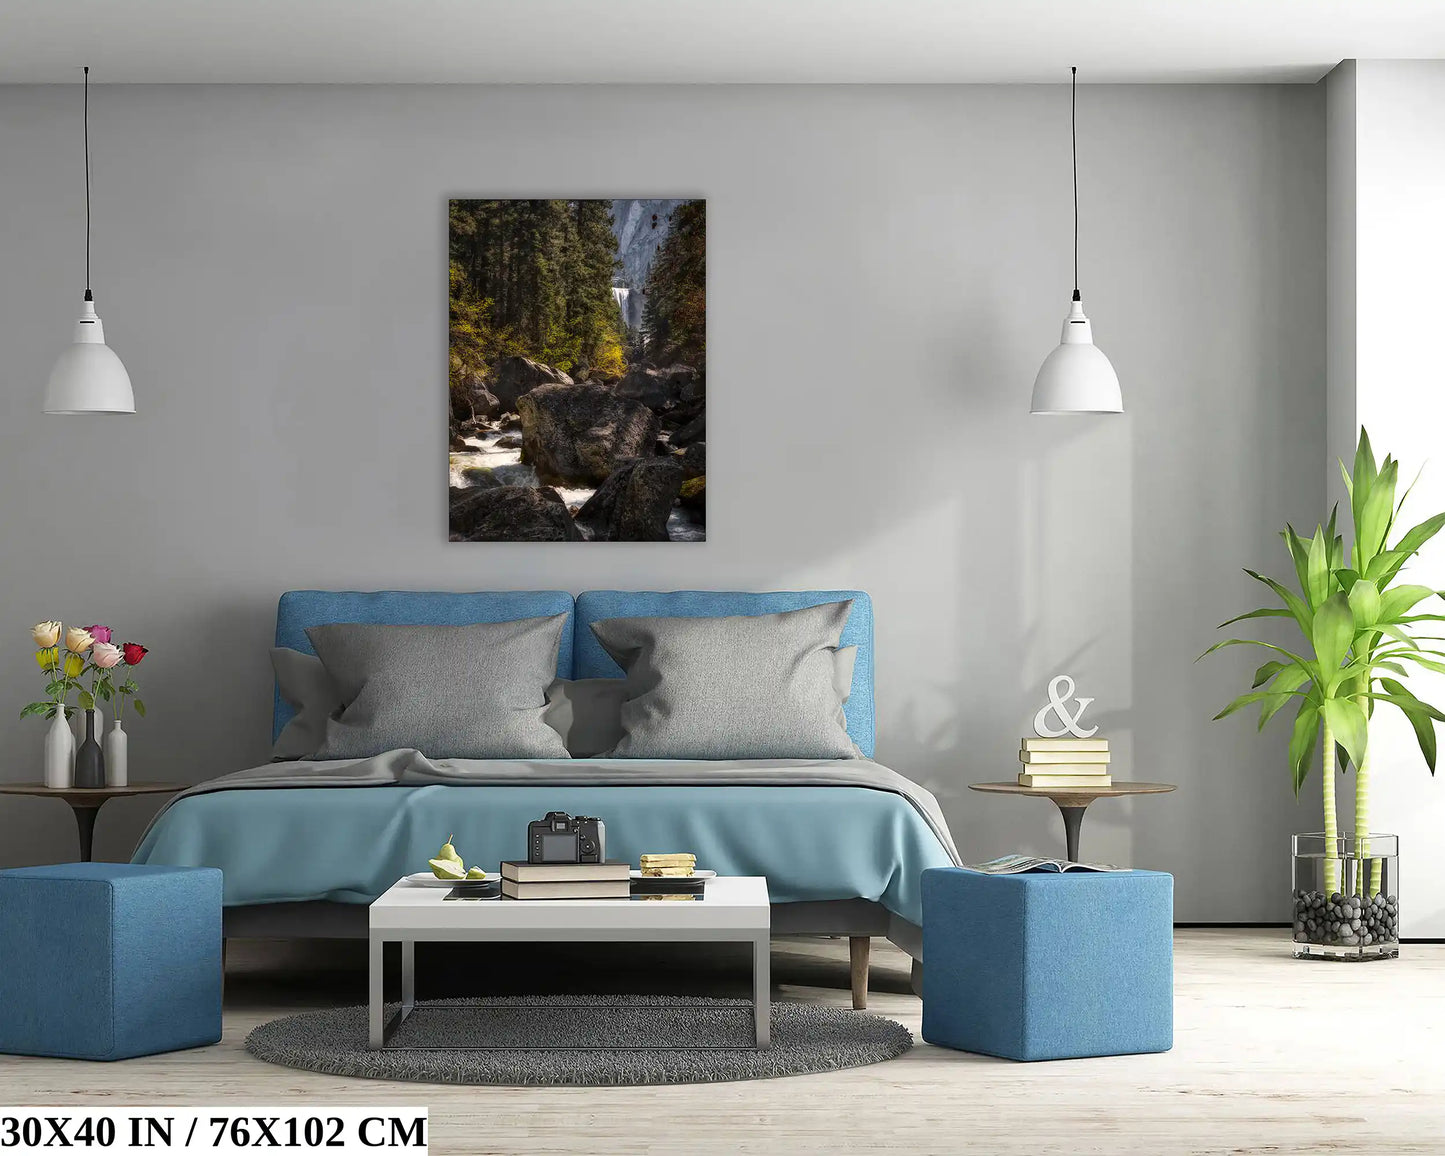 A 30x-40-inch print of Vernal Falls in Yosemite on a bedroom wall, complementing the blue bedspread and room decor.